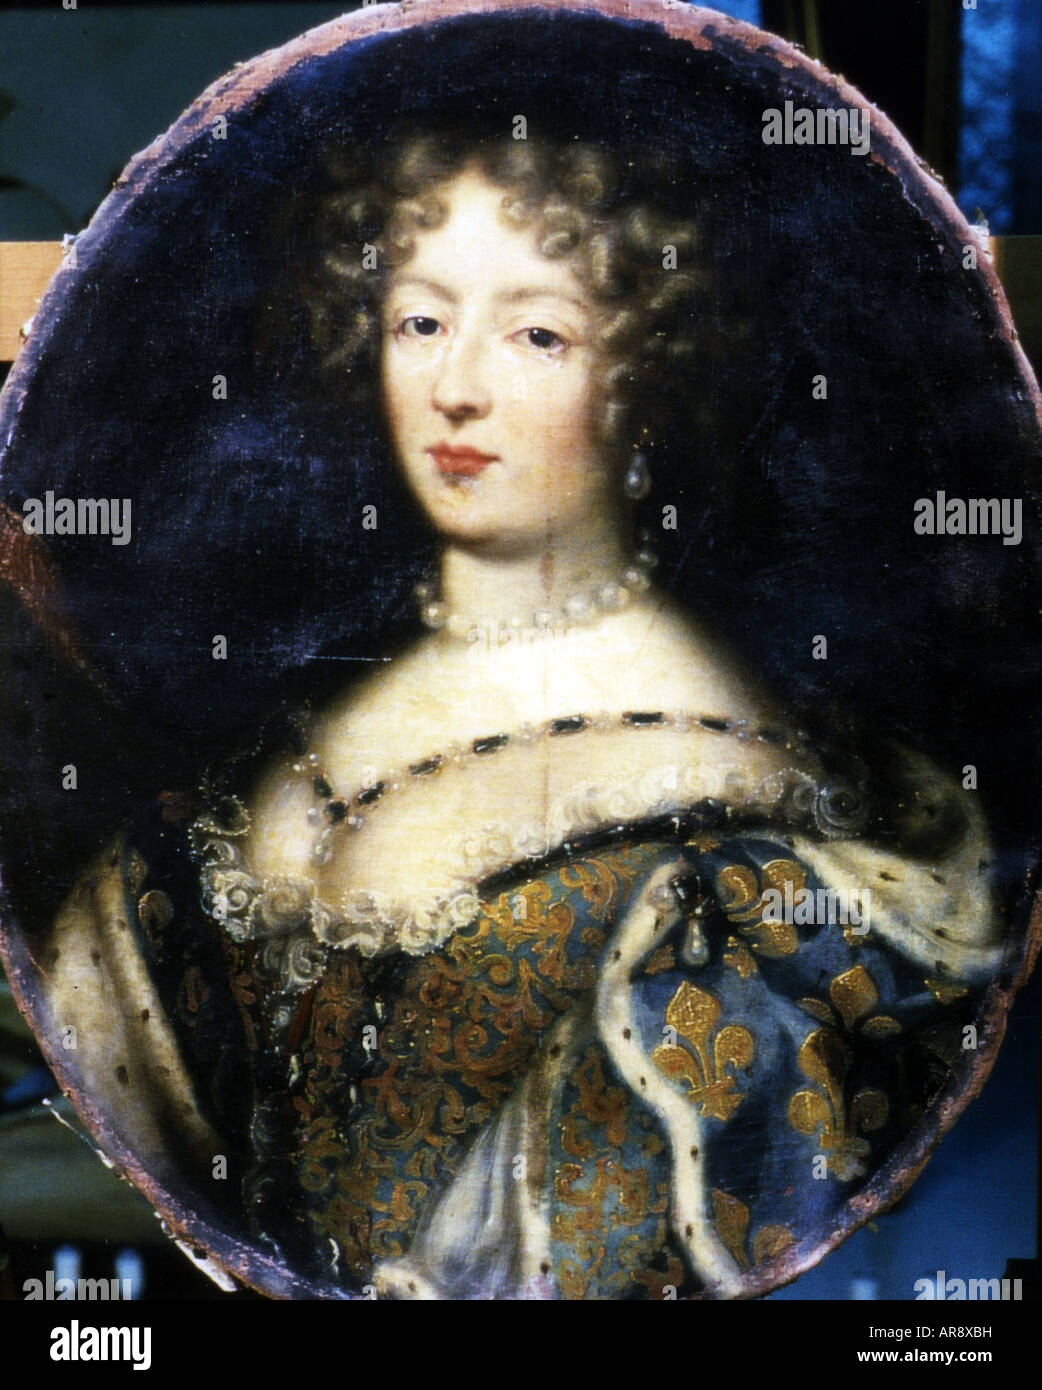 Elizabeth Charlotte, 27.5.1652 - 8.12.1722, Duchess of Orleans 17.11.1671 - 8.6.1701, portrait, painting by Pierre Mignard, 17th century, Musee dS  Art et dS  Histoire, Narbonne, , Artist's Copyright has not to be cleared Stock Photo